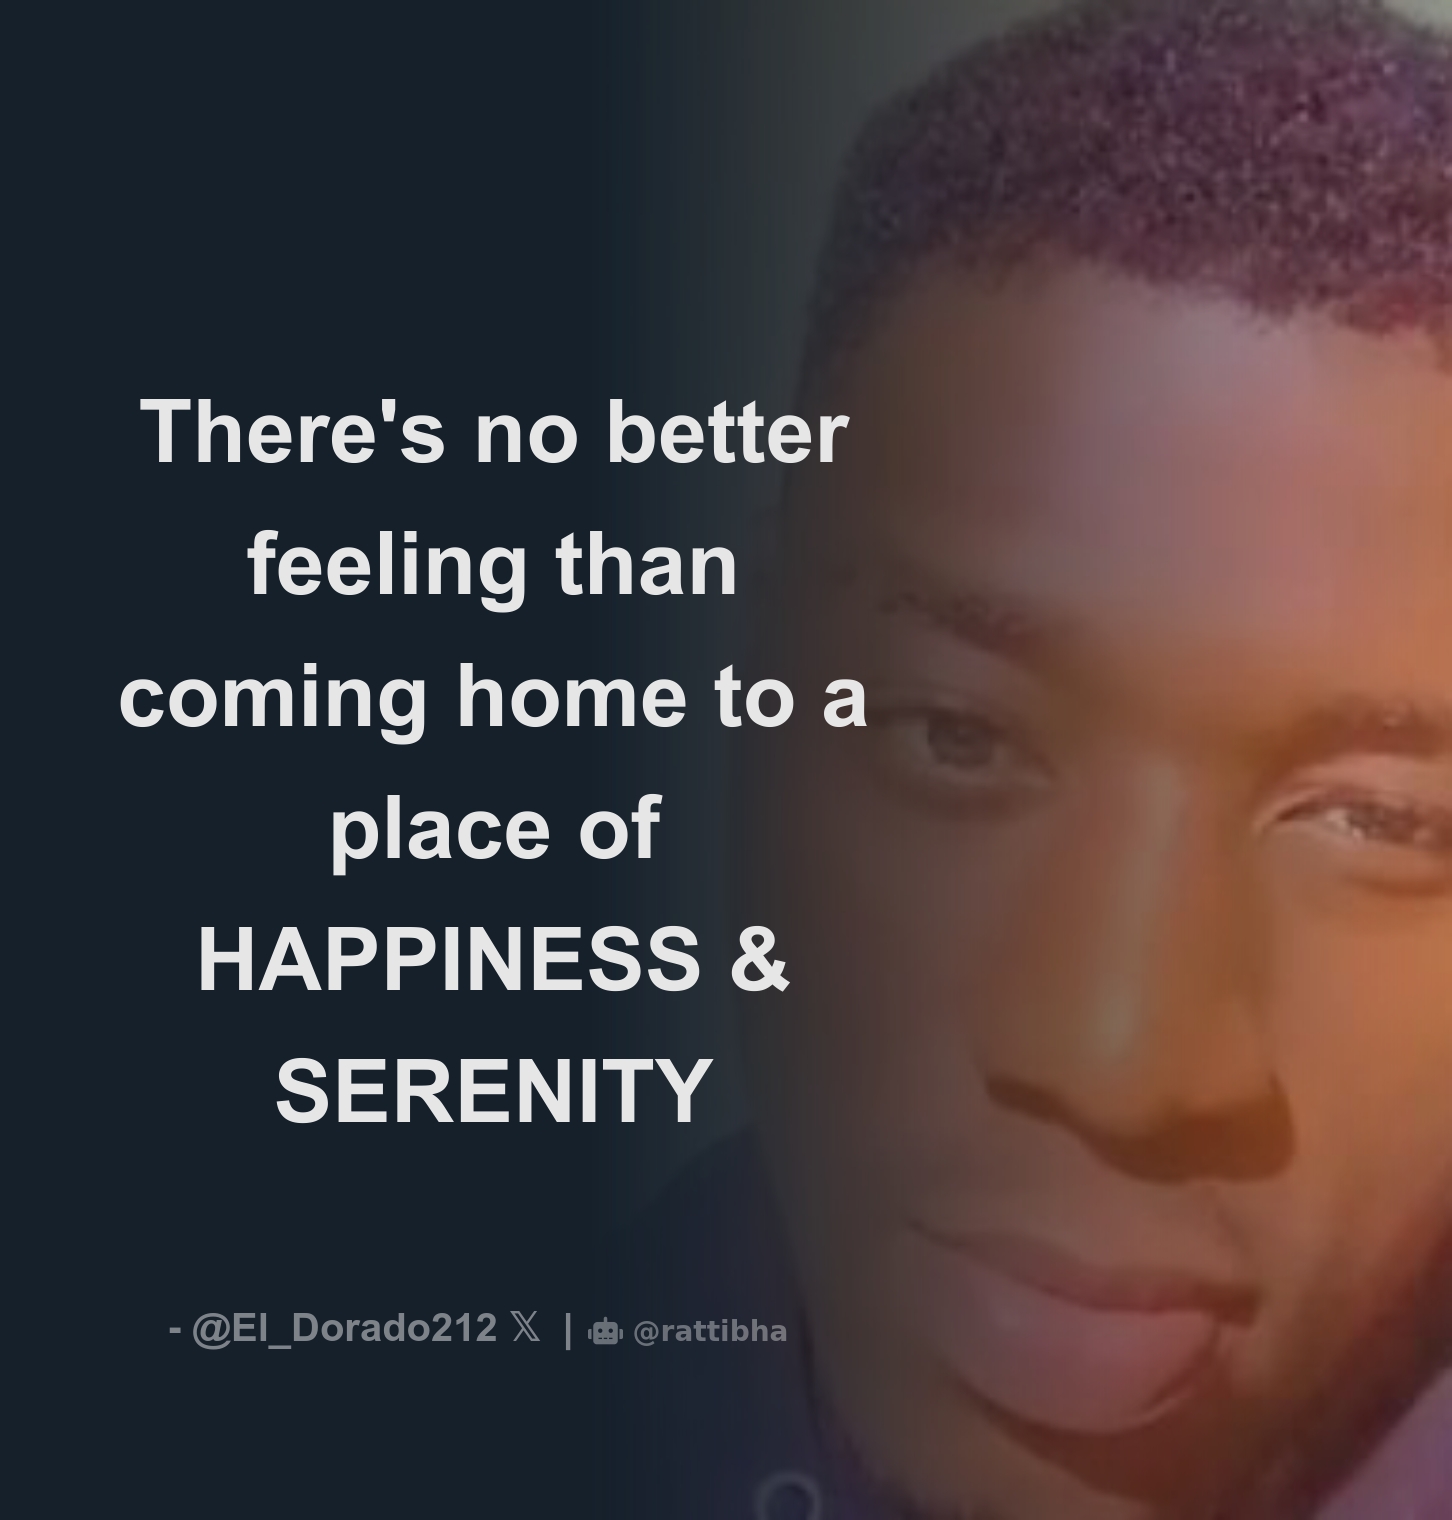 There's no better feeling than coming home to a place of HAPPINESS &  SERENITY - Thread from Eleke X Kingsley 👁️‍🗨️ @El_Dorado212 - Rattibha